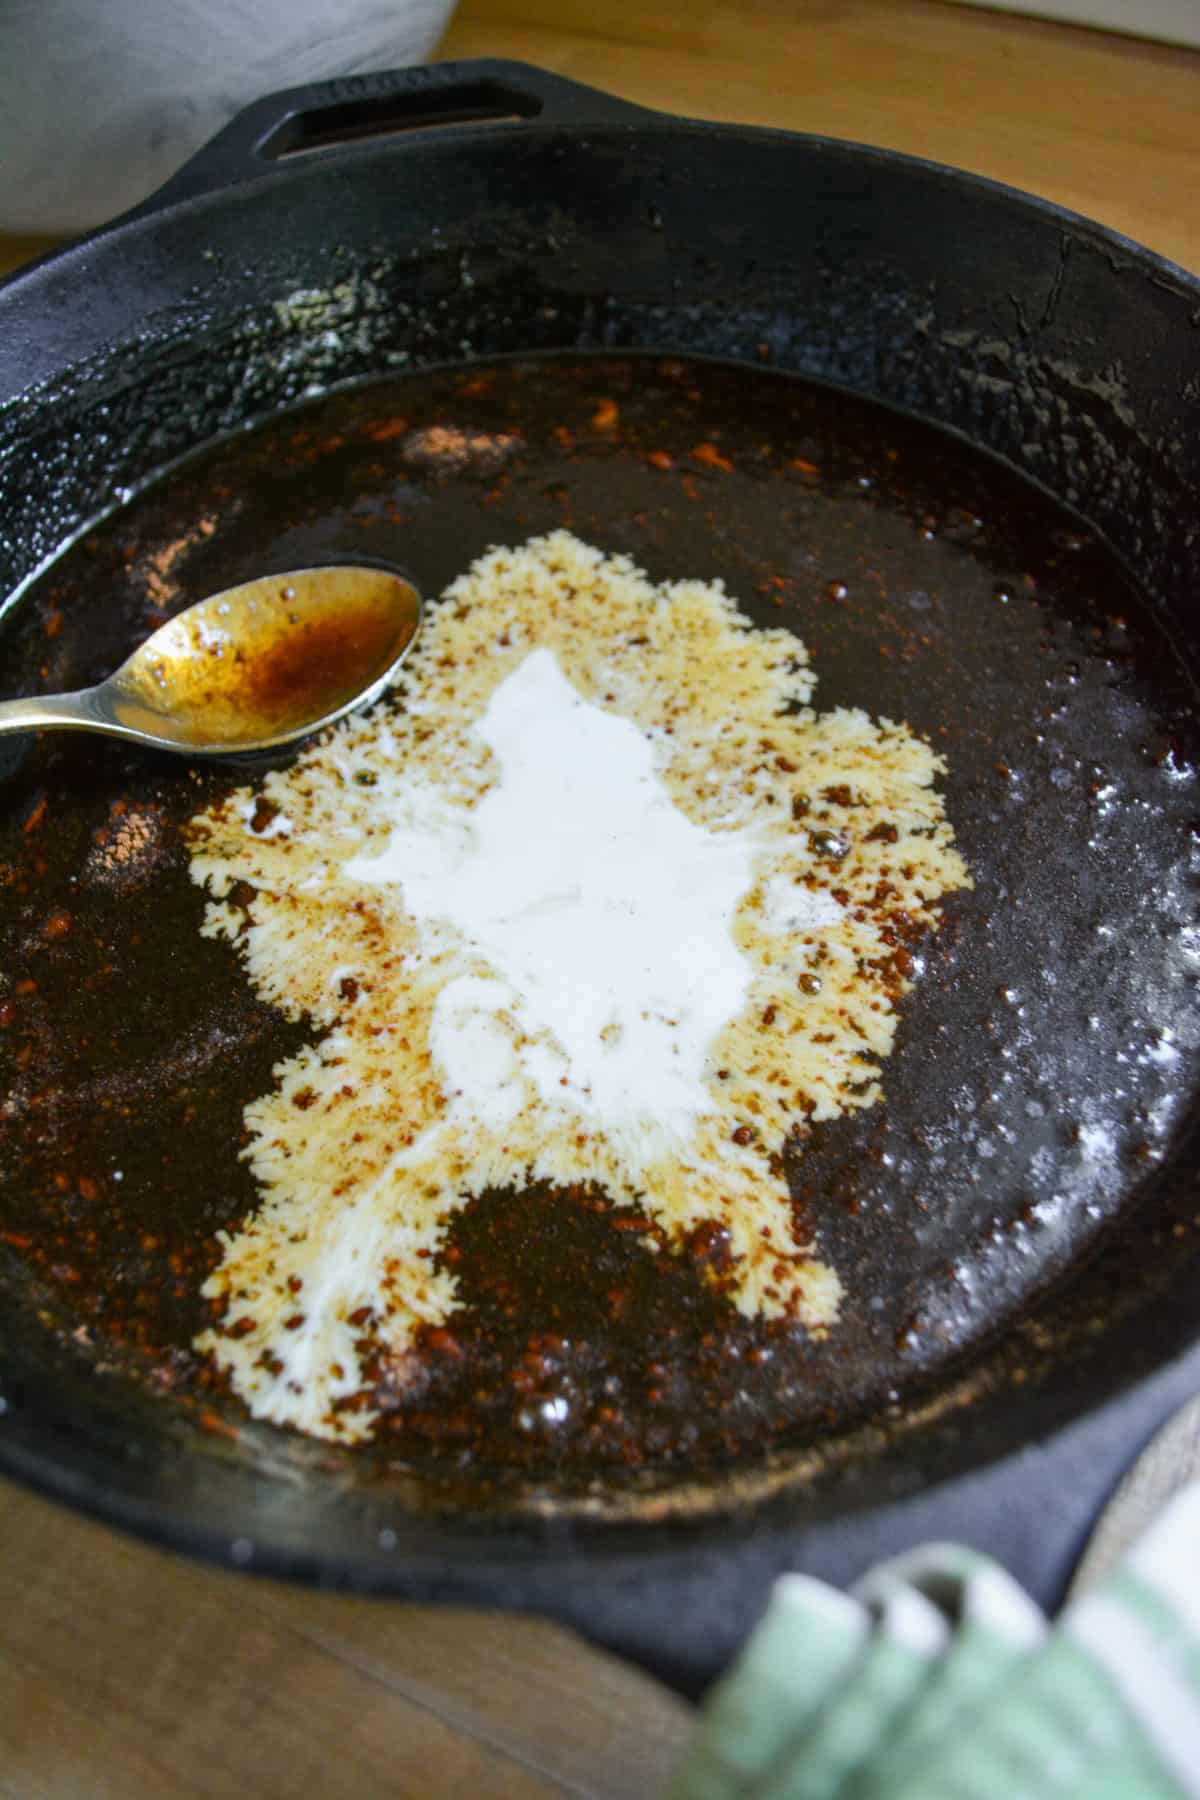 Cornstarch slurry added to the caramel in a black pan.